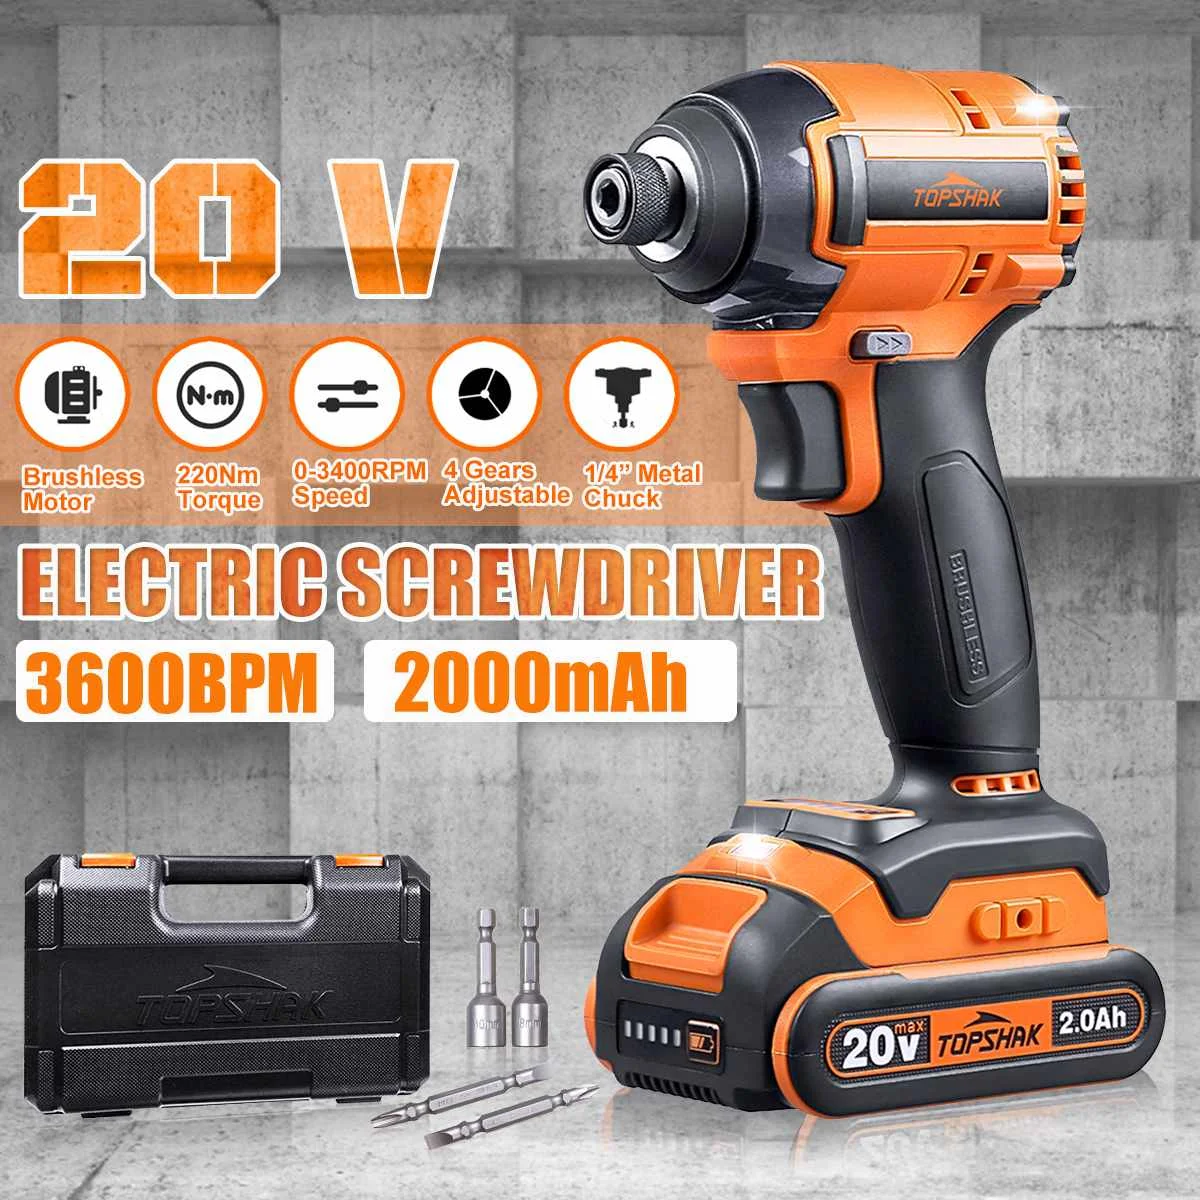 TOPSHAK 20V Electric Screwdriver Brushless Cordless Impact Driver LED Light 1X Battery Rechargeable Woodworking Power Tools